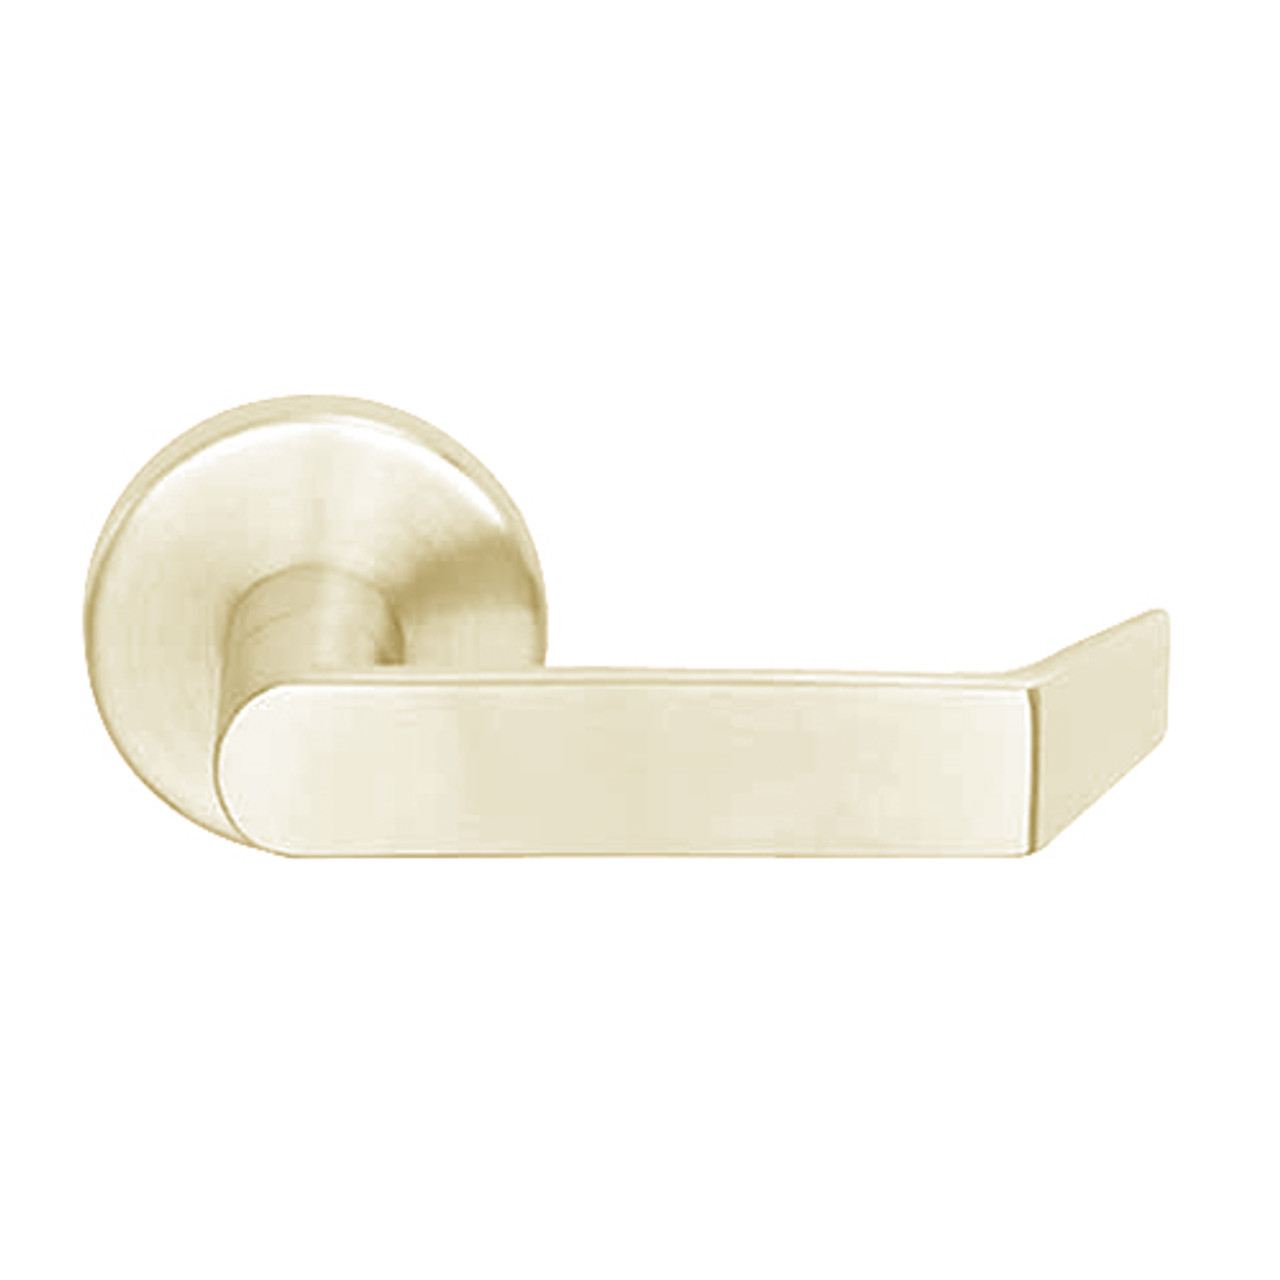 L9010-06A-606 Schlage L Series Passage Latch Commercial Mortise Lock with 06 Cast Lever Design in Satin Brass